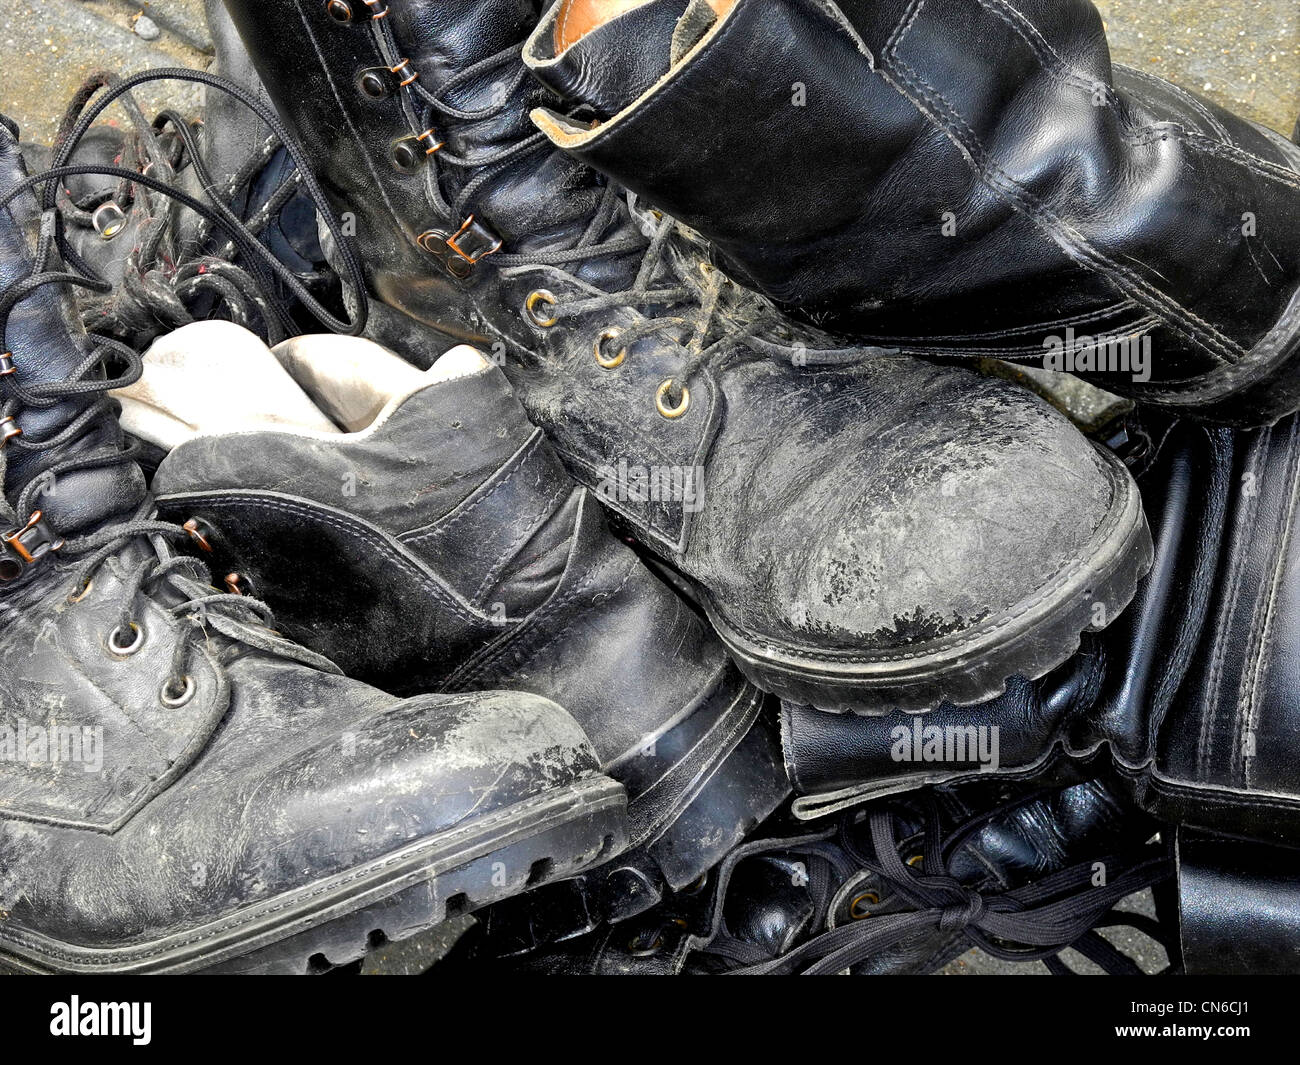 A pile of old boots Stock Photo - Alamy